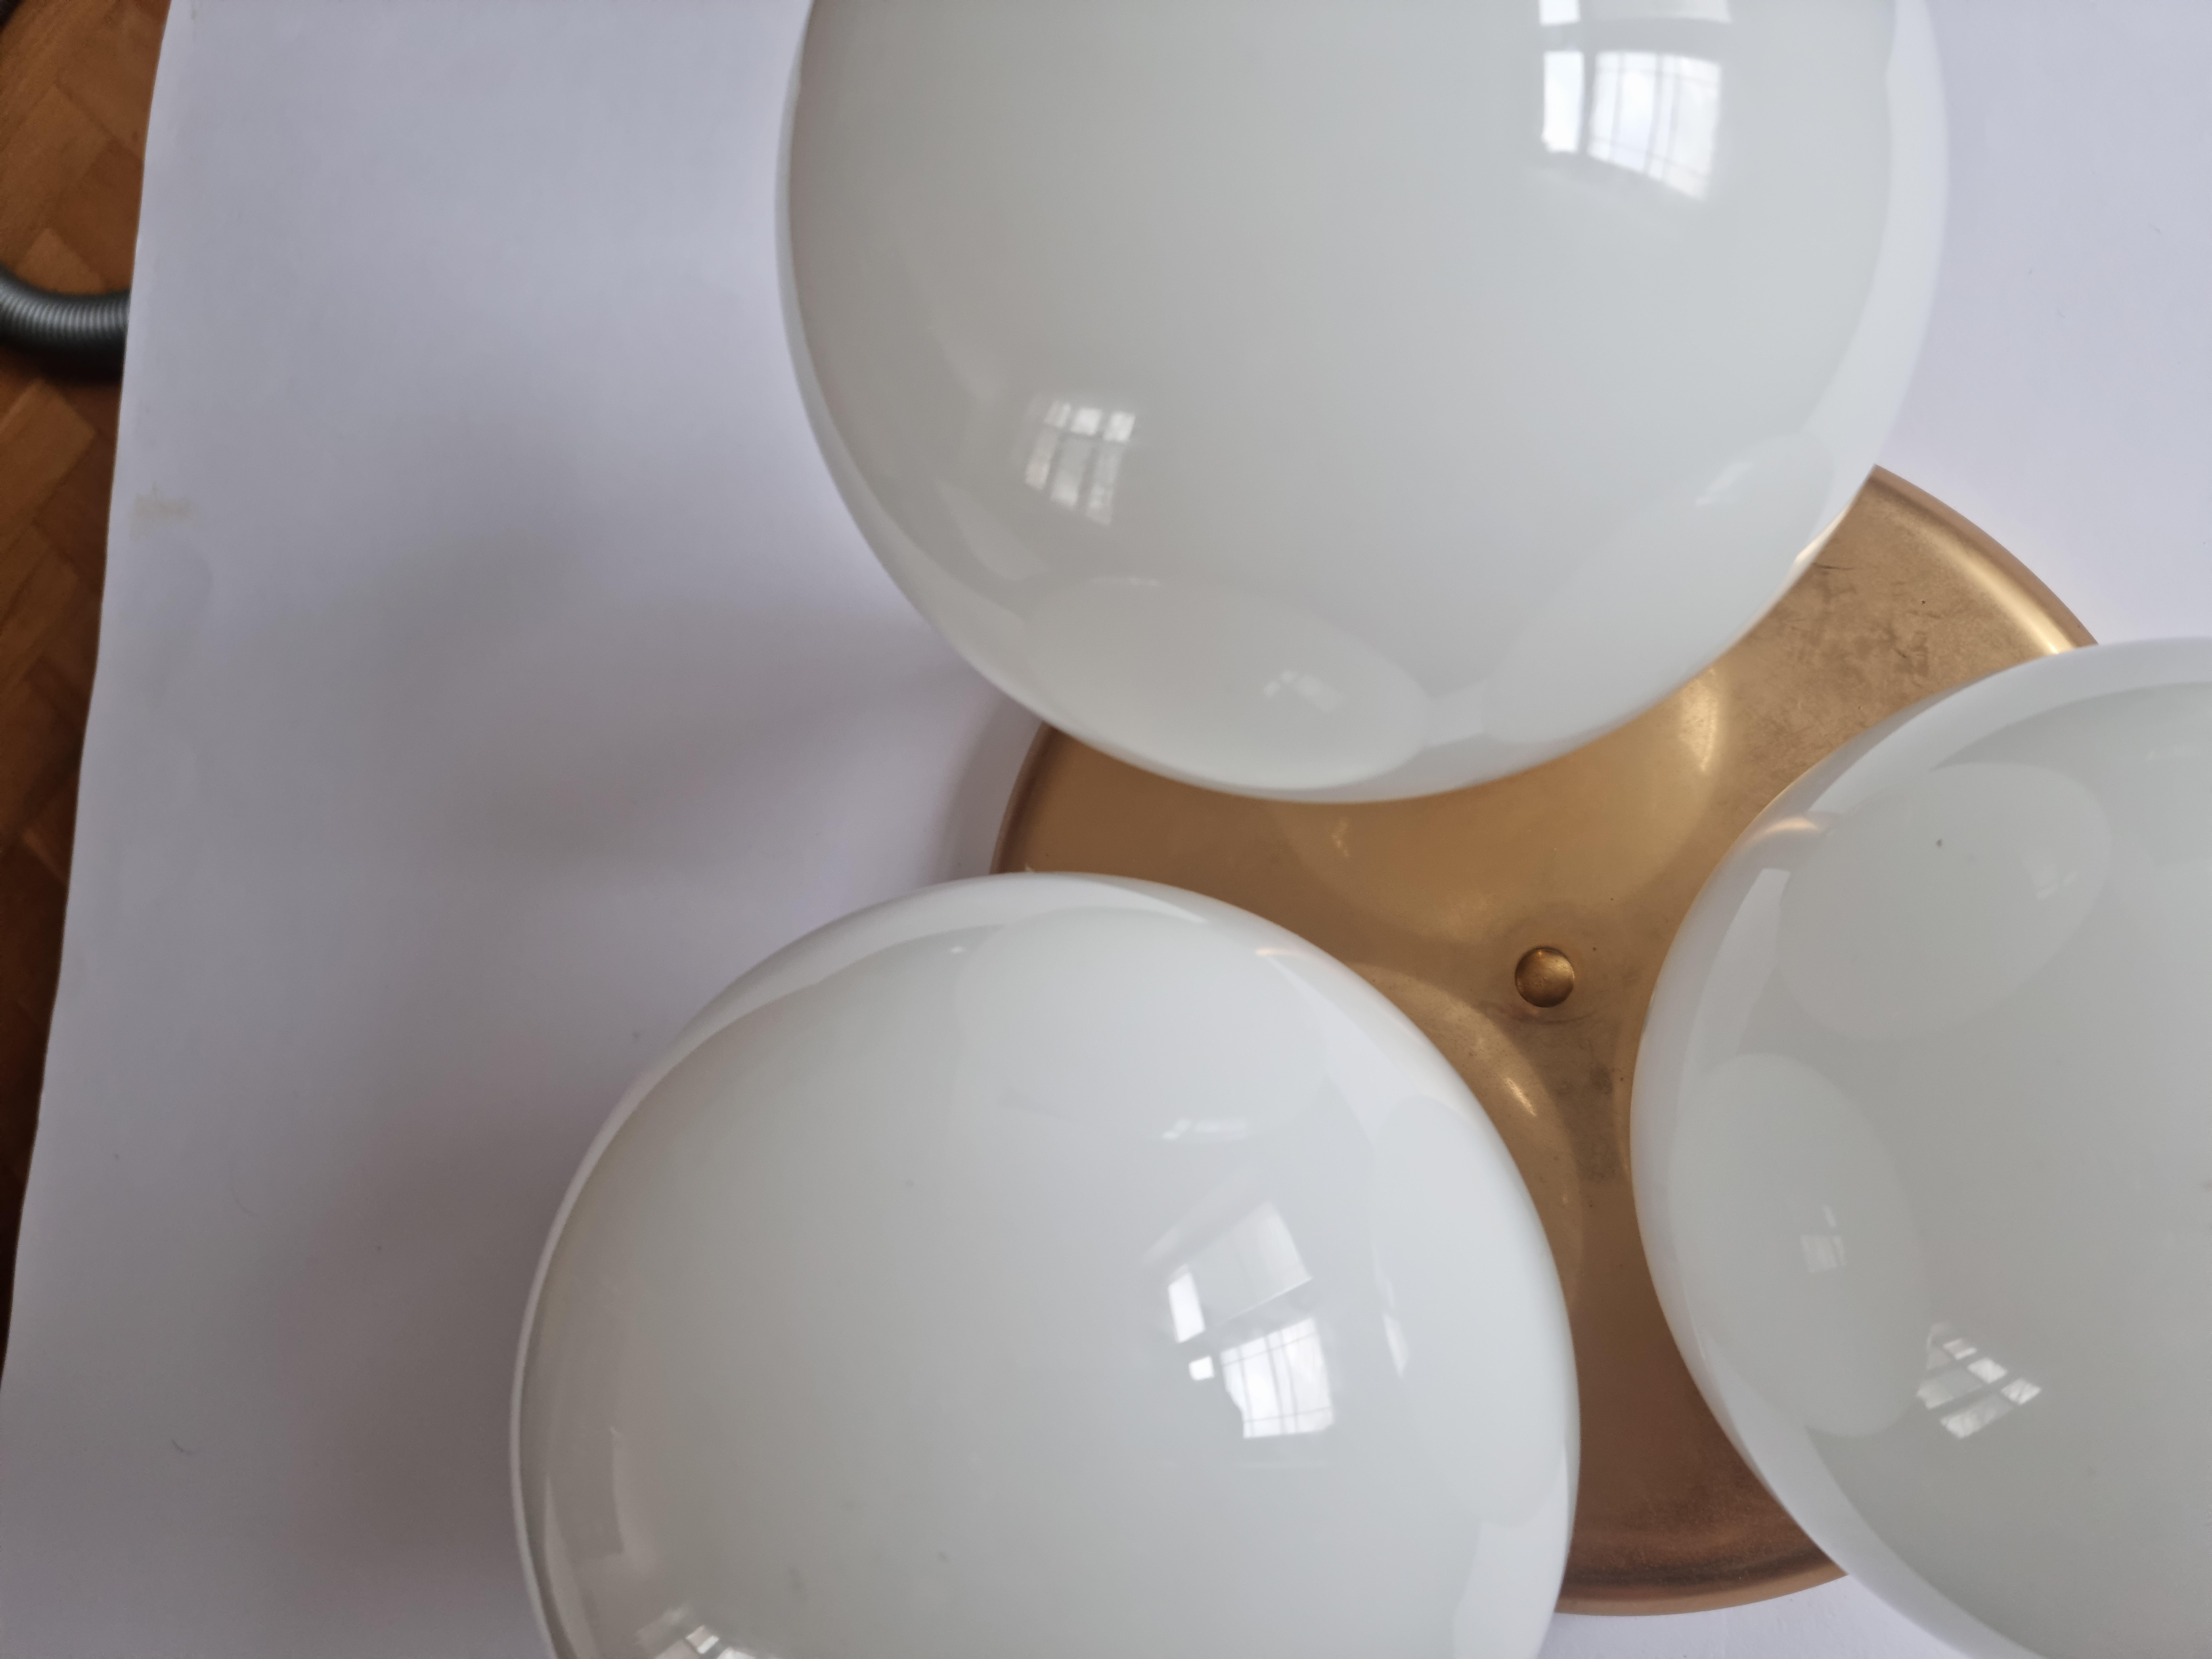 Pair of Midcentury Flush Mount Ceiling or Wall Lamps, Germany, 1970s For Sale 1